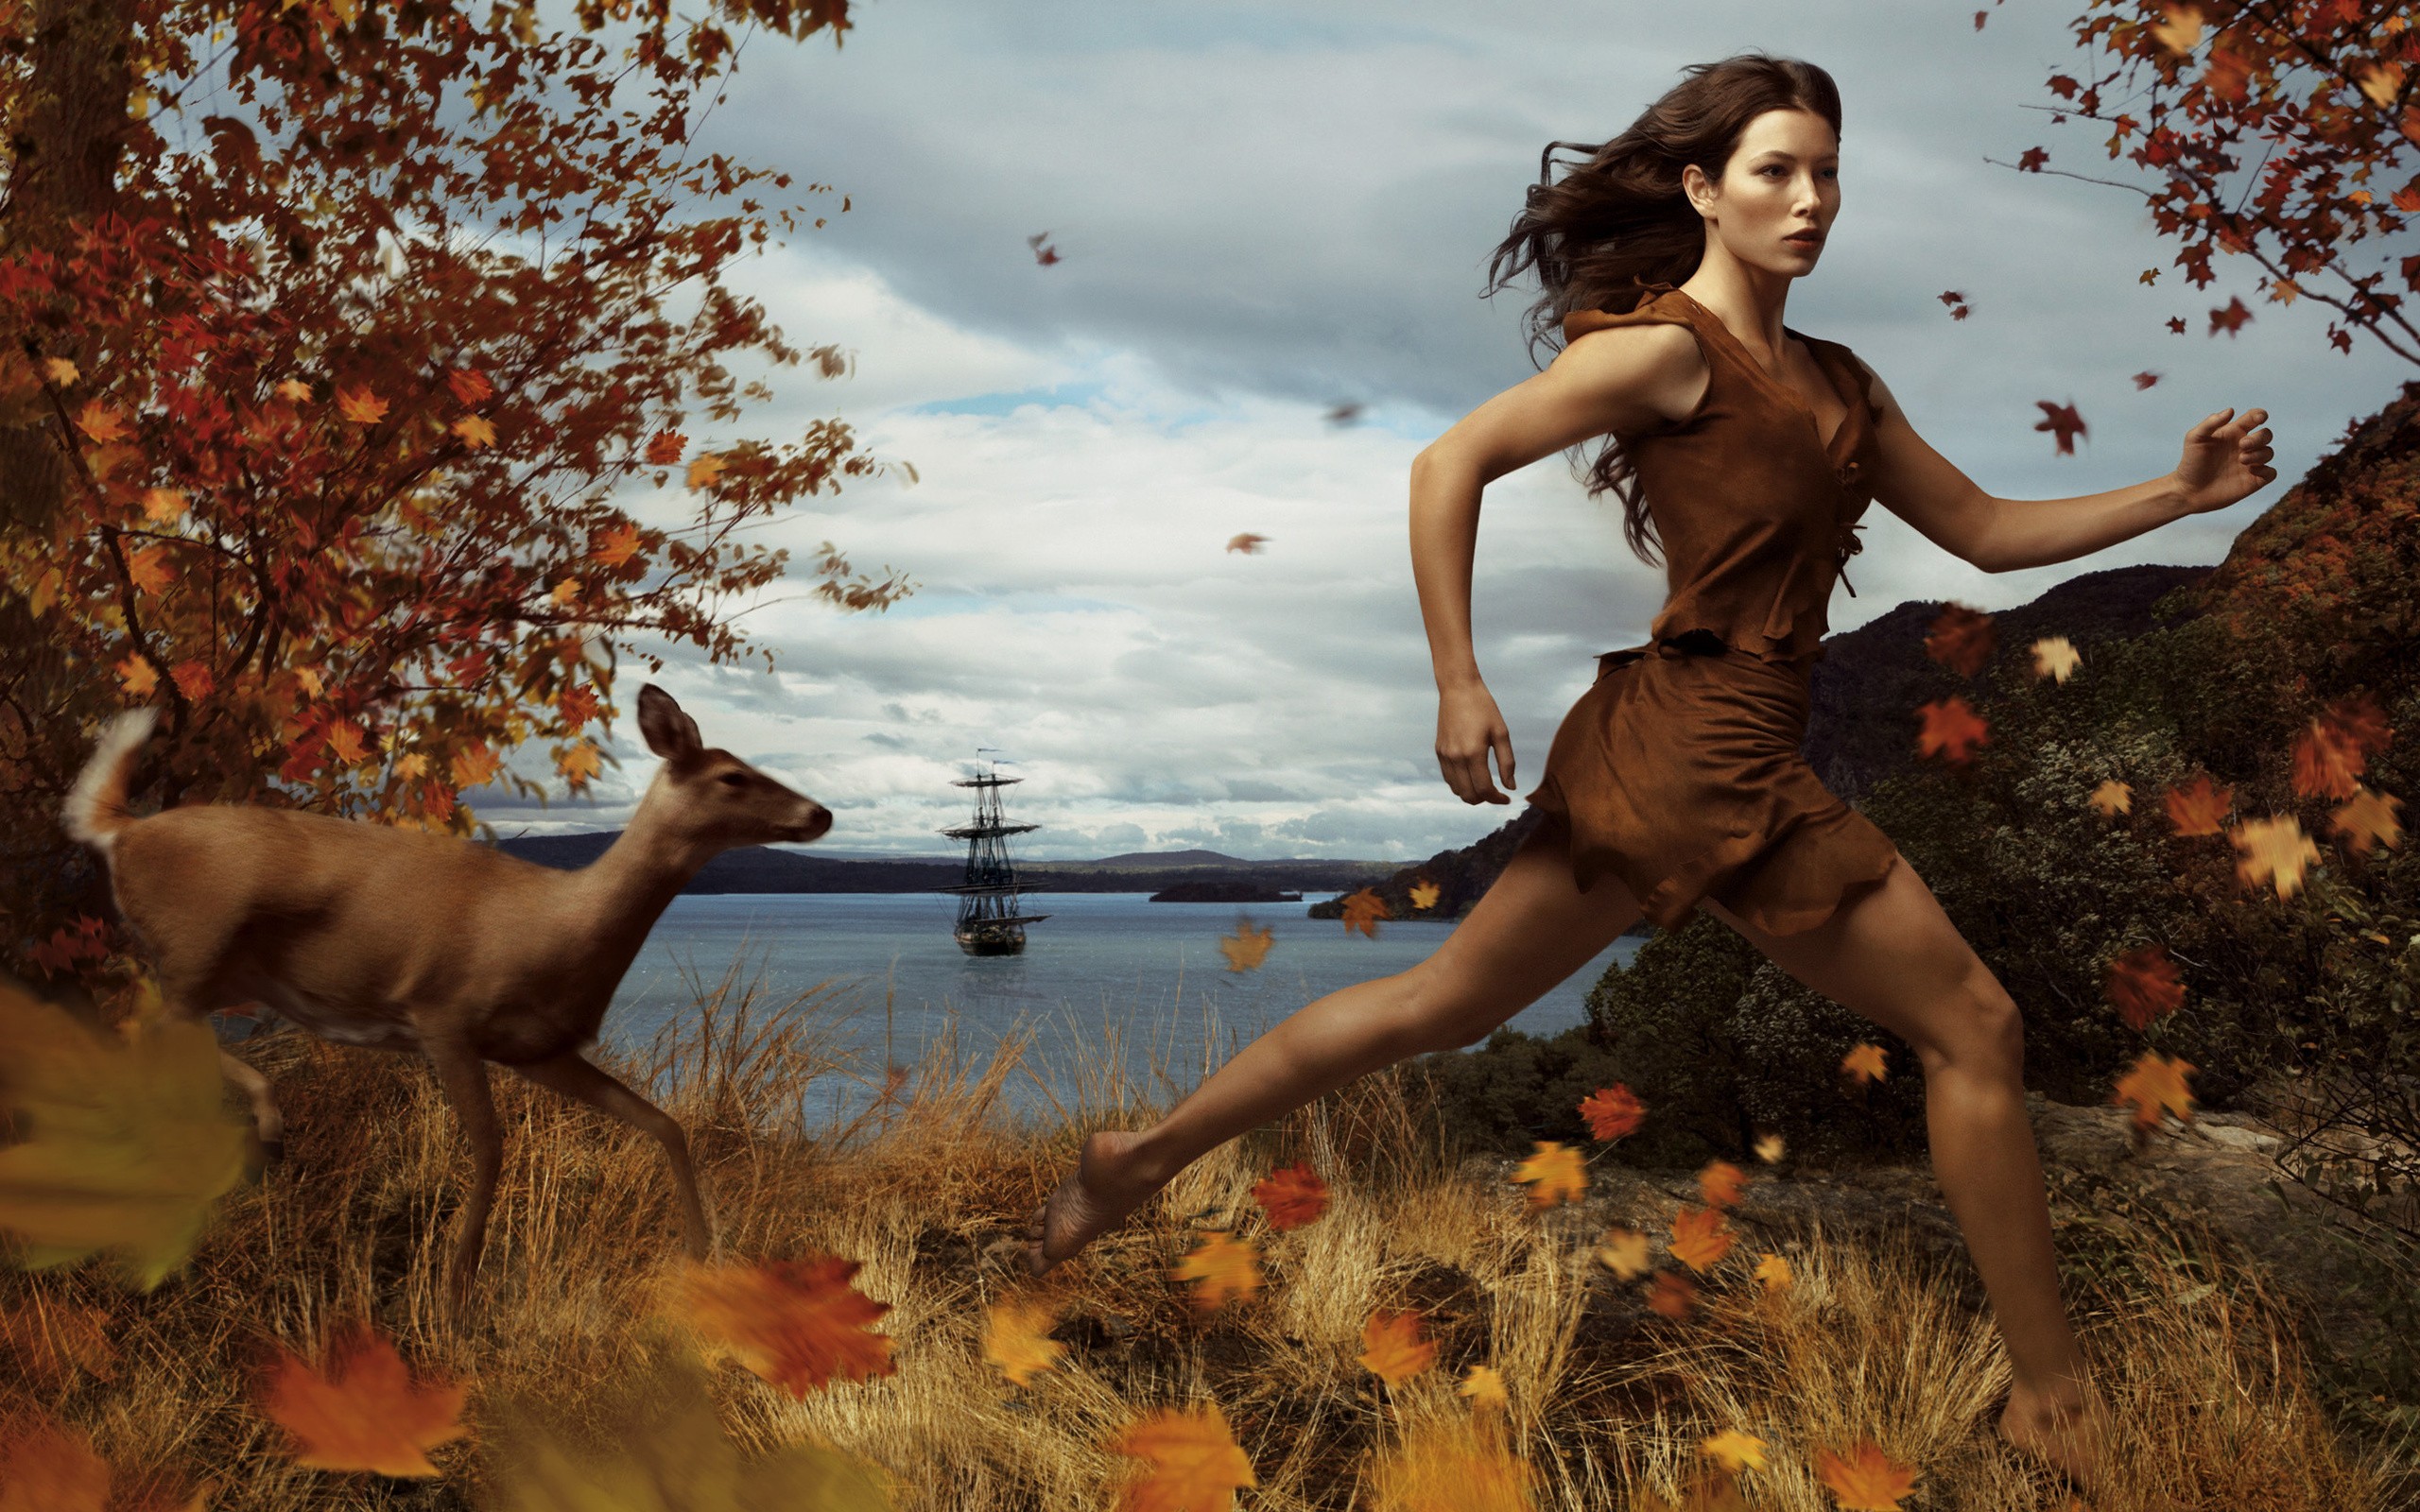 People 2560x1600 women brunette long hair women outdoors nature trees fall leaves running fictional animals fawns sea sailing ship bay clouds mountains hills grass motion blur windy open mouth mythology deer mammals Jessica Biel actress celebrity Annie Leibovitz Pocahontas